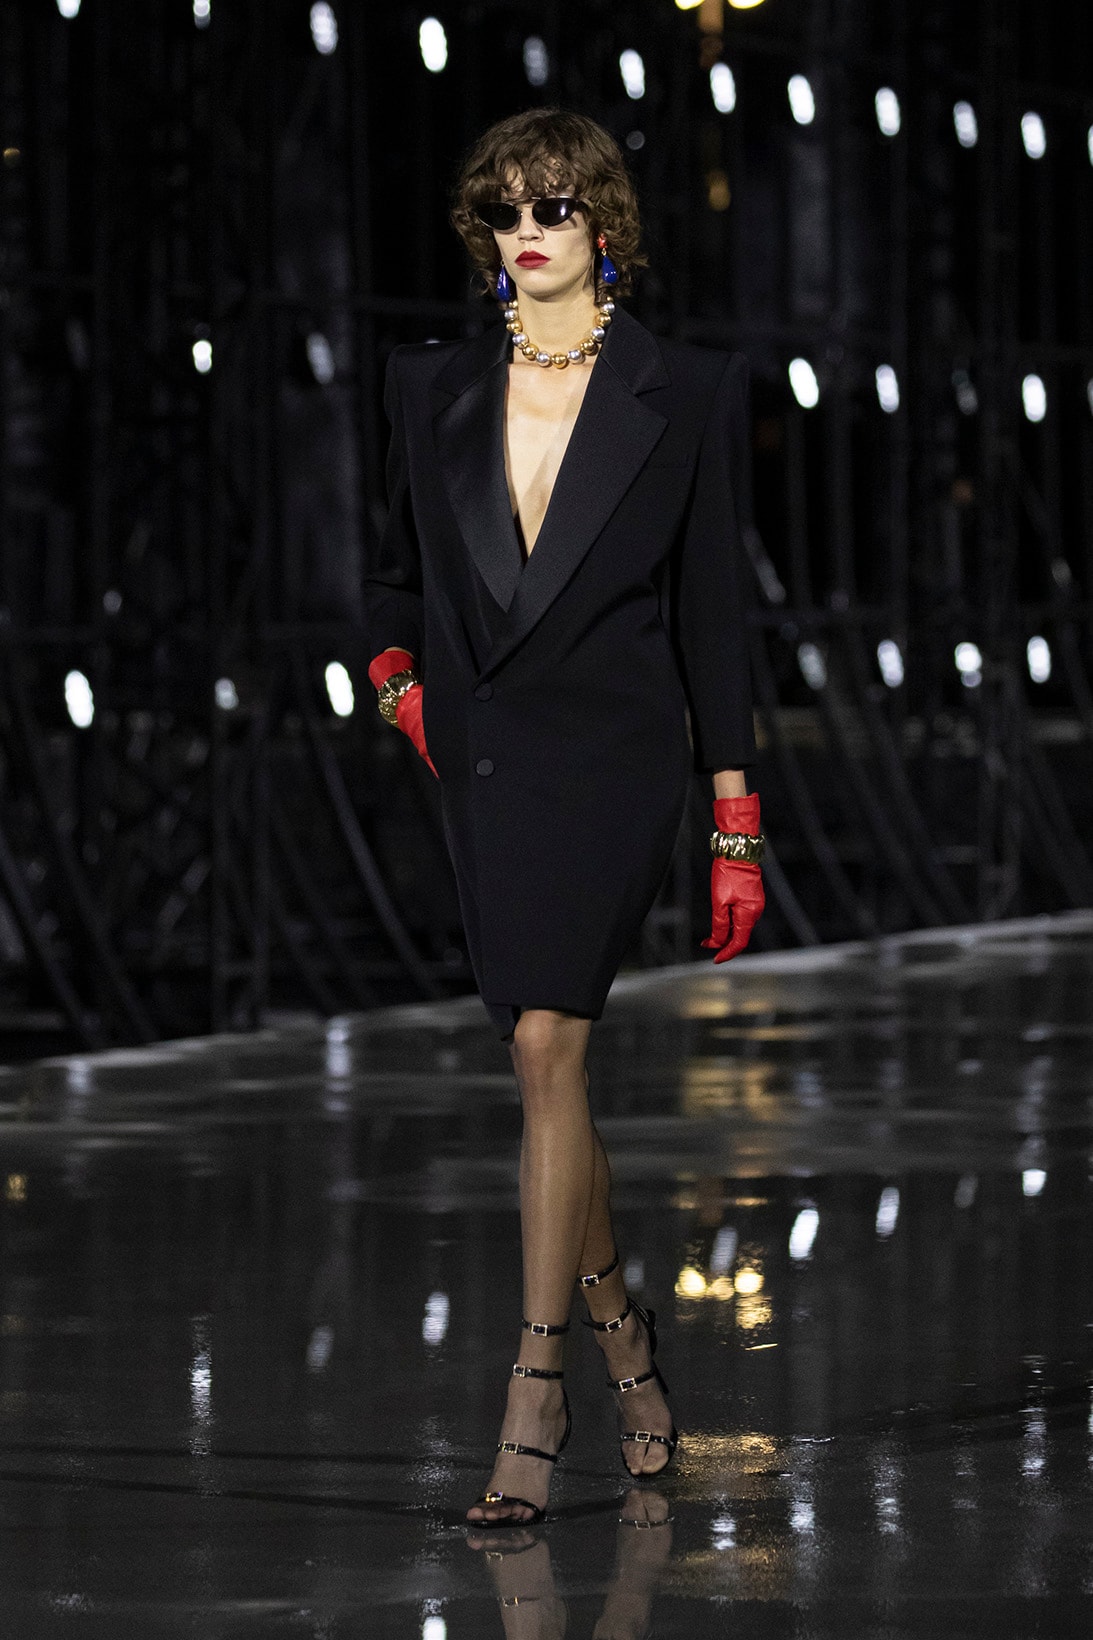 Saint Laurent YSL Spring Summer 2022 SS22 Collection Runway Show Paris Fashion Week Anthony Vaccarello